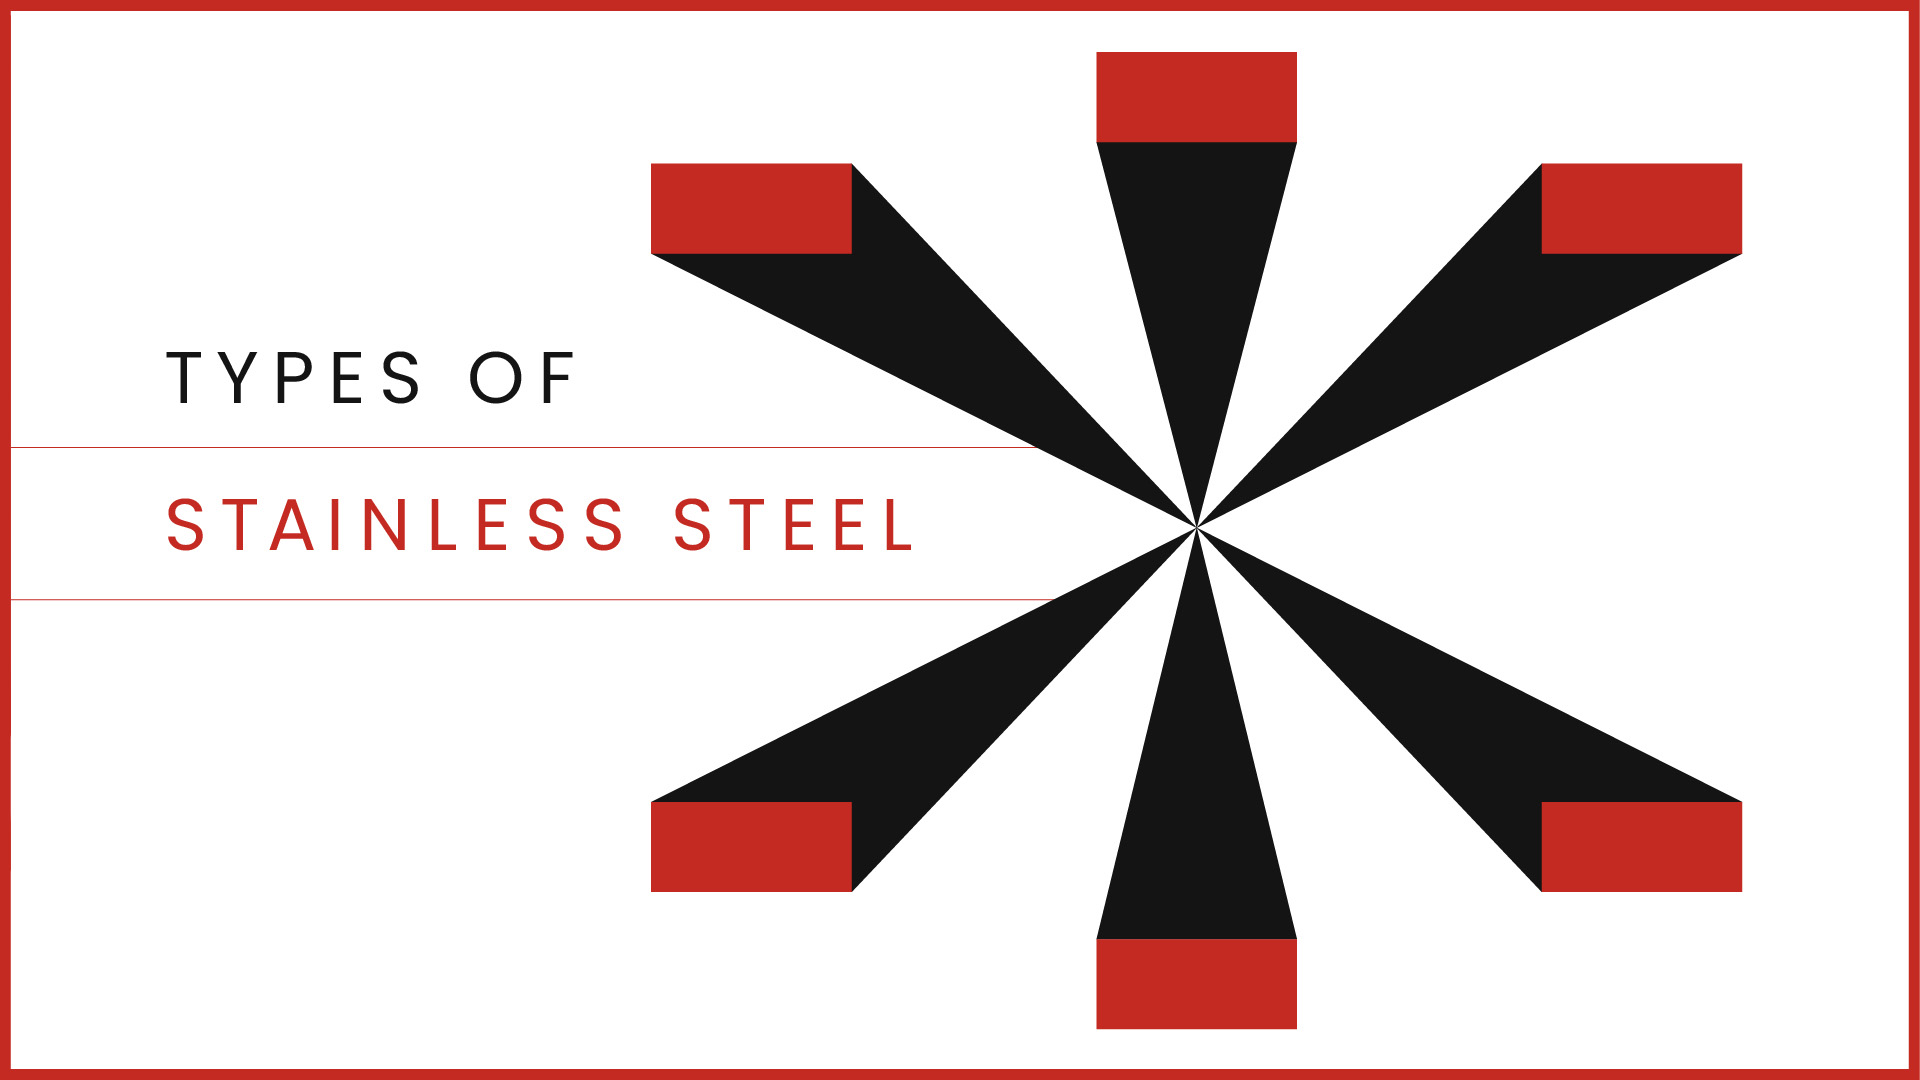 A Deep Look Into the Various Types of Stainless Steel